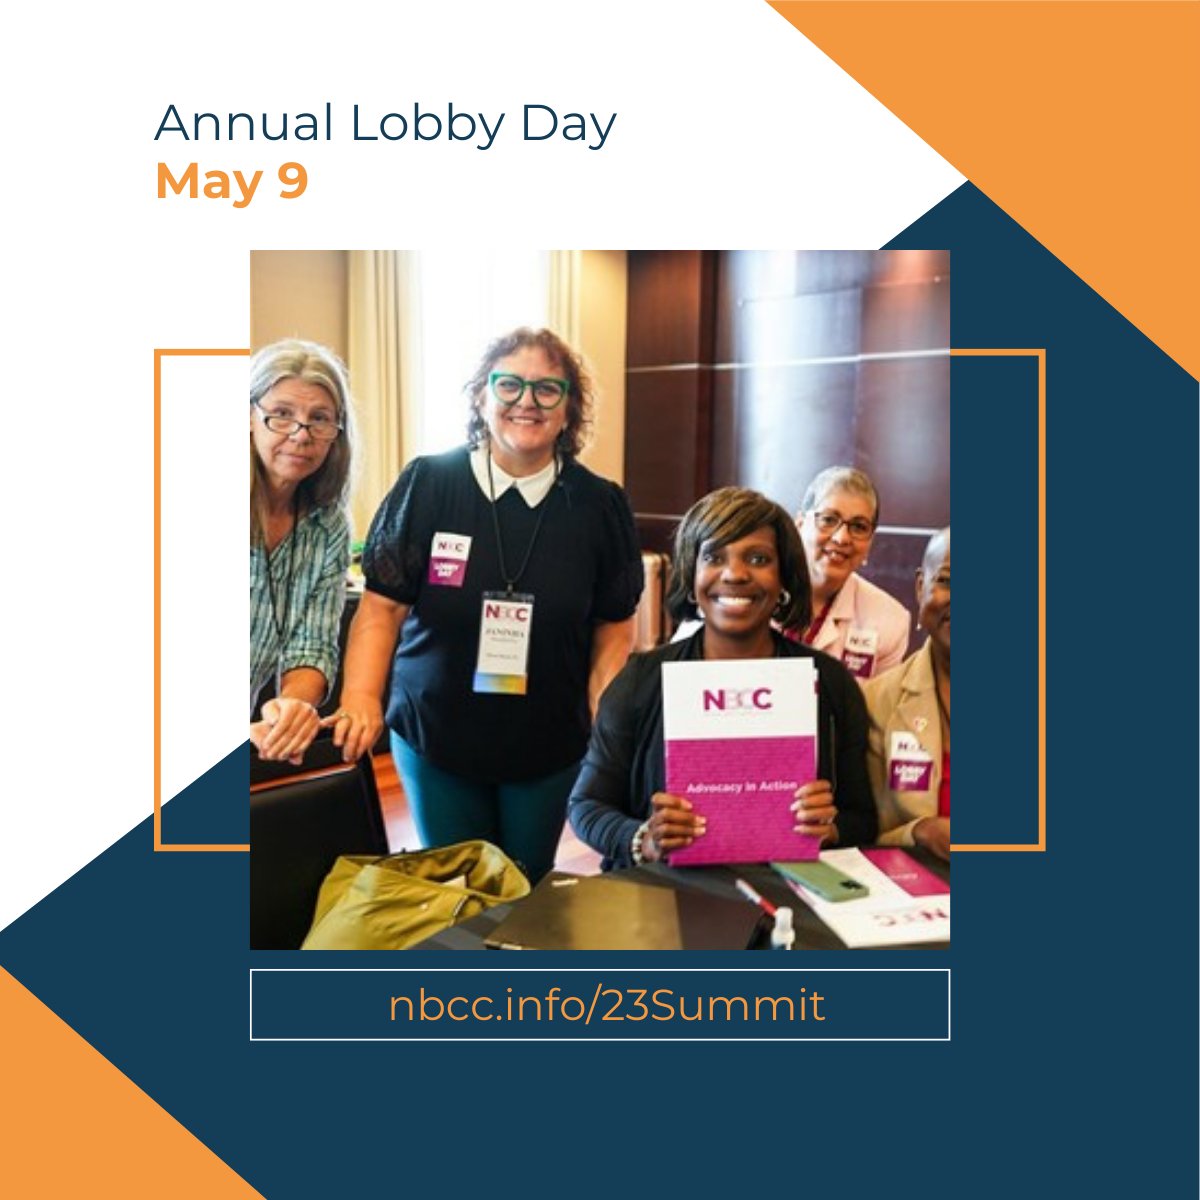 test Twitter Media - NBCC advocates are educated, effective, feared, and revered! Our #LobbyDay is May 9th, and advocates will ask for bipartisan support for our 2023 legislative and public policy priorities. #NBCCOnTheHill https://t.co/Ef9qm0tRMg